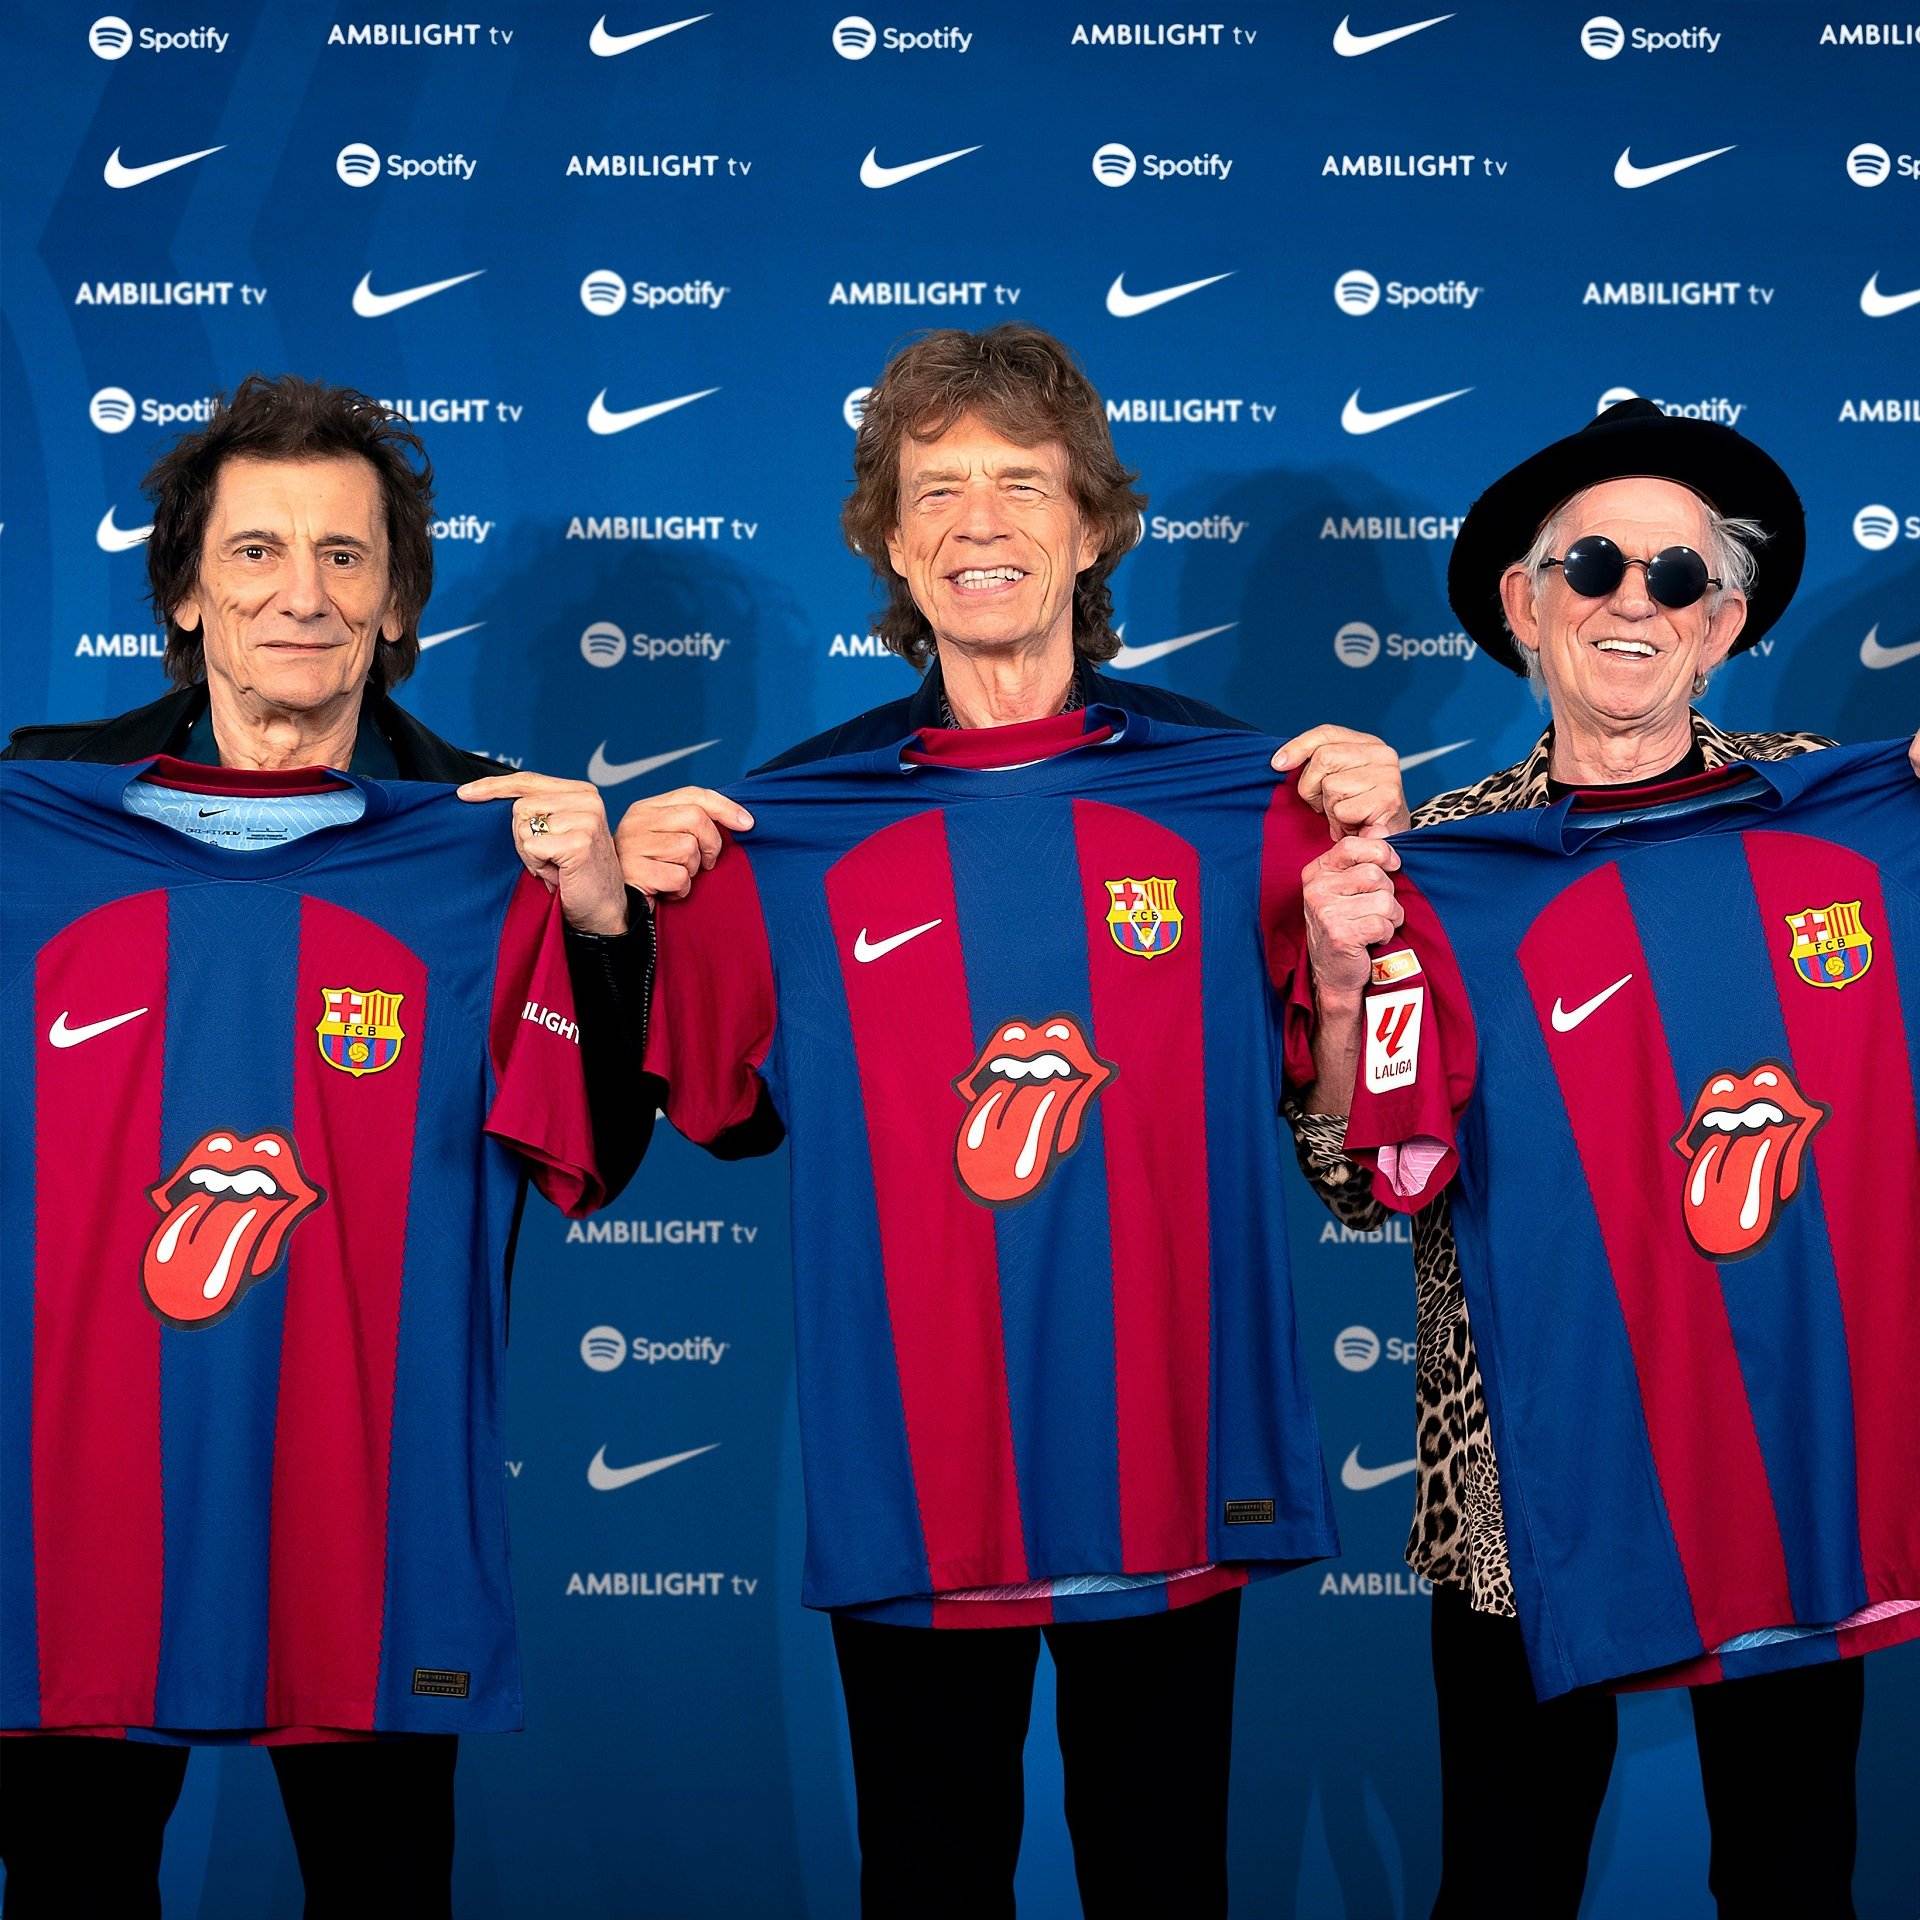 Barça to wear iconic Rolling Stones logo on shirts against Real Madrid for October 28th Classic